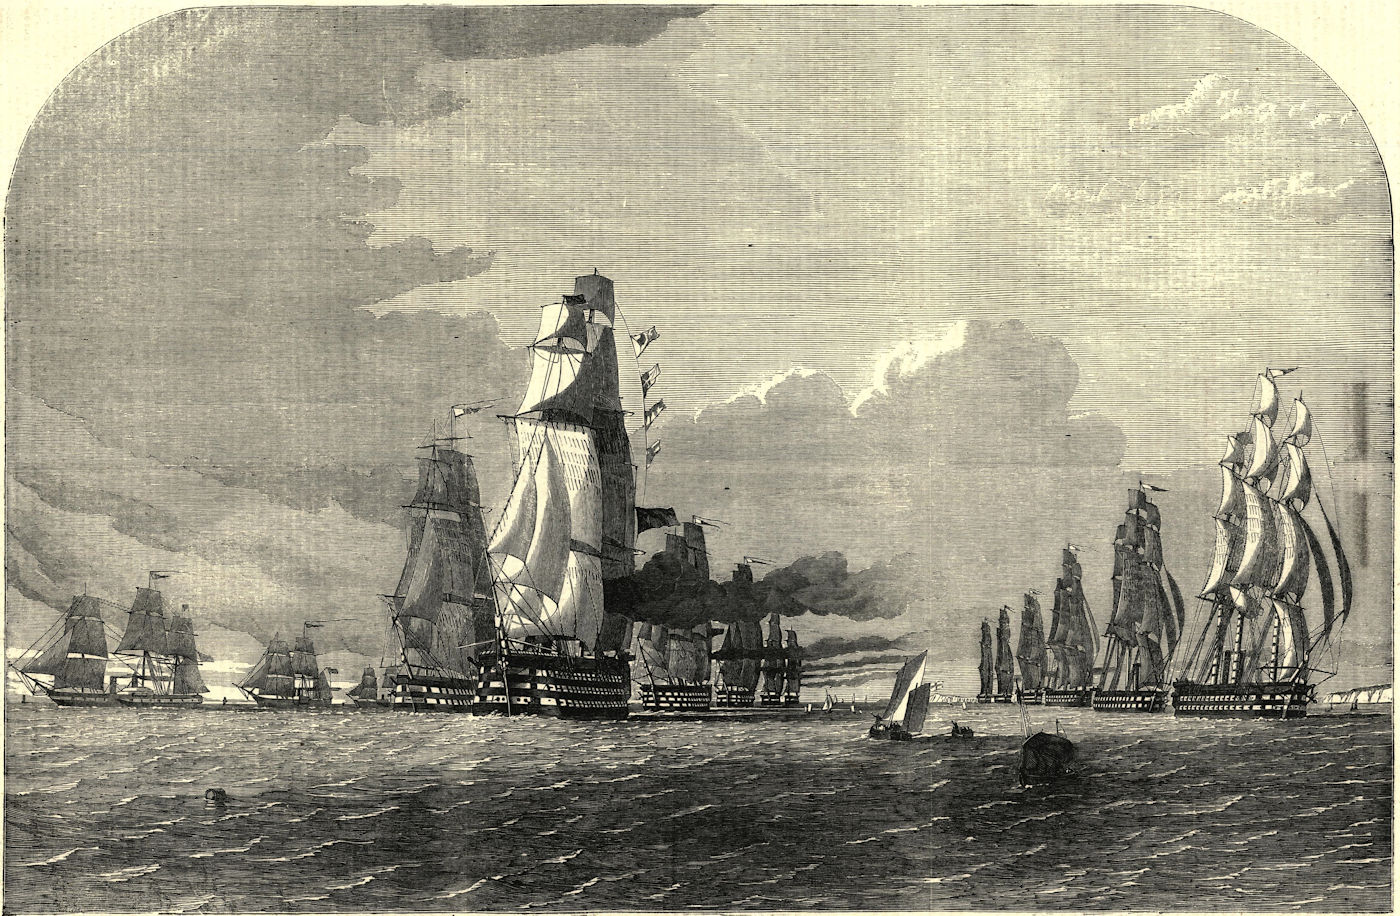 Associate Product The Baltic Fleet running for Dover Straits, sketched by OW Brierley 1854